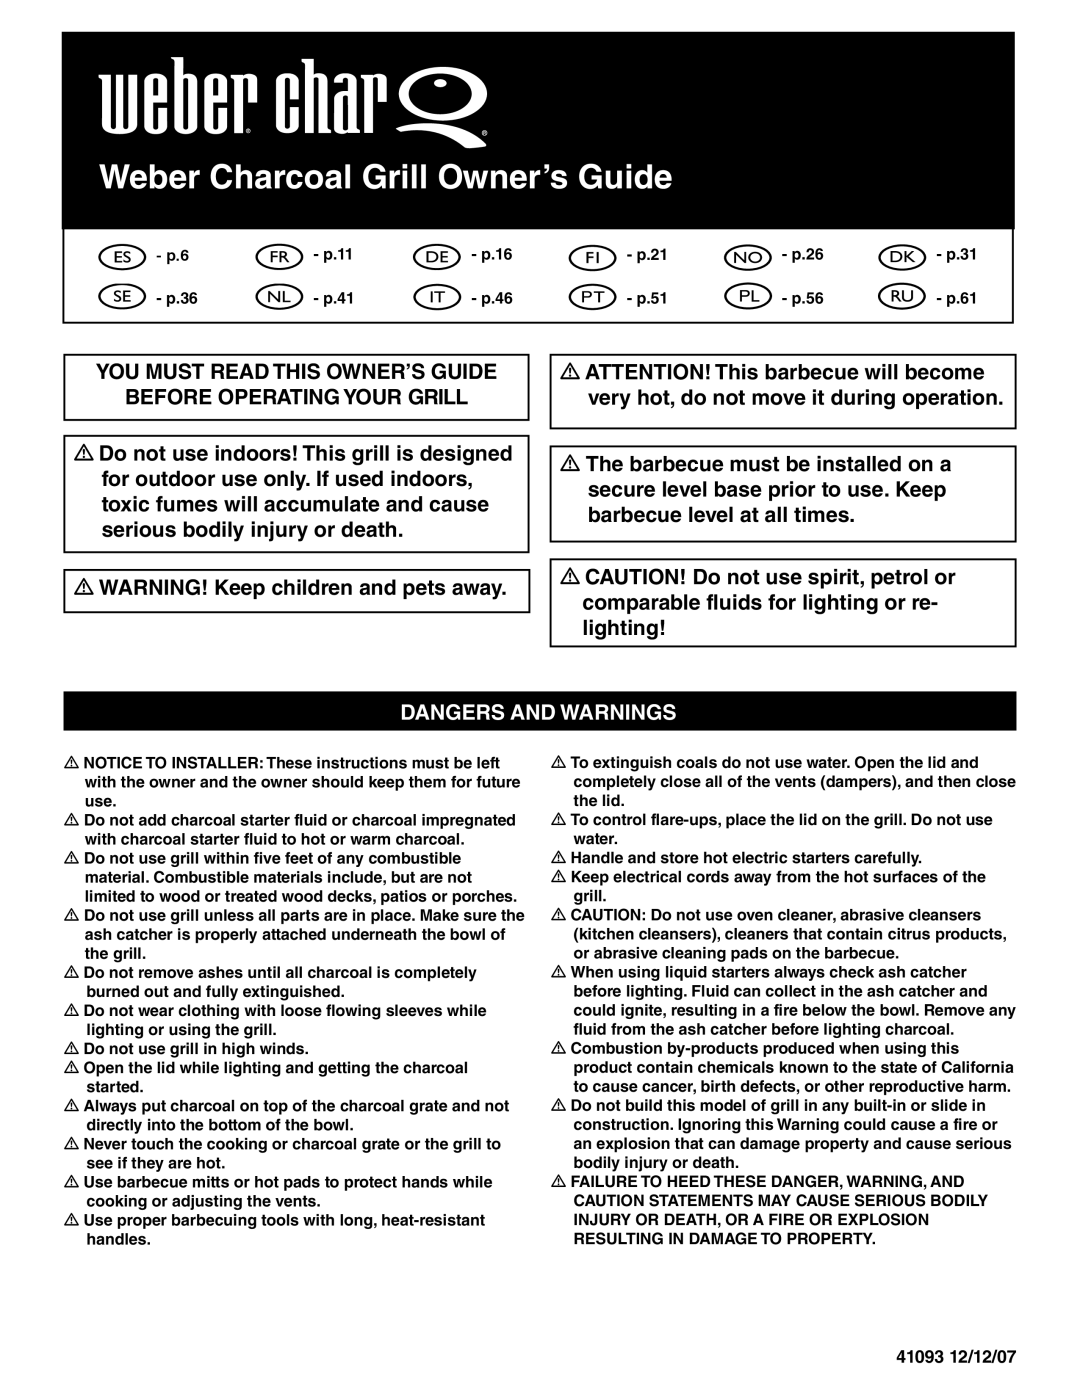 Weber 41093 manual Weber Charcoal Grill Owner’s Guide, Dangers And Warnings 